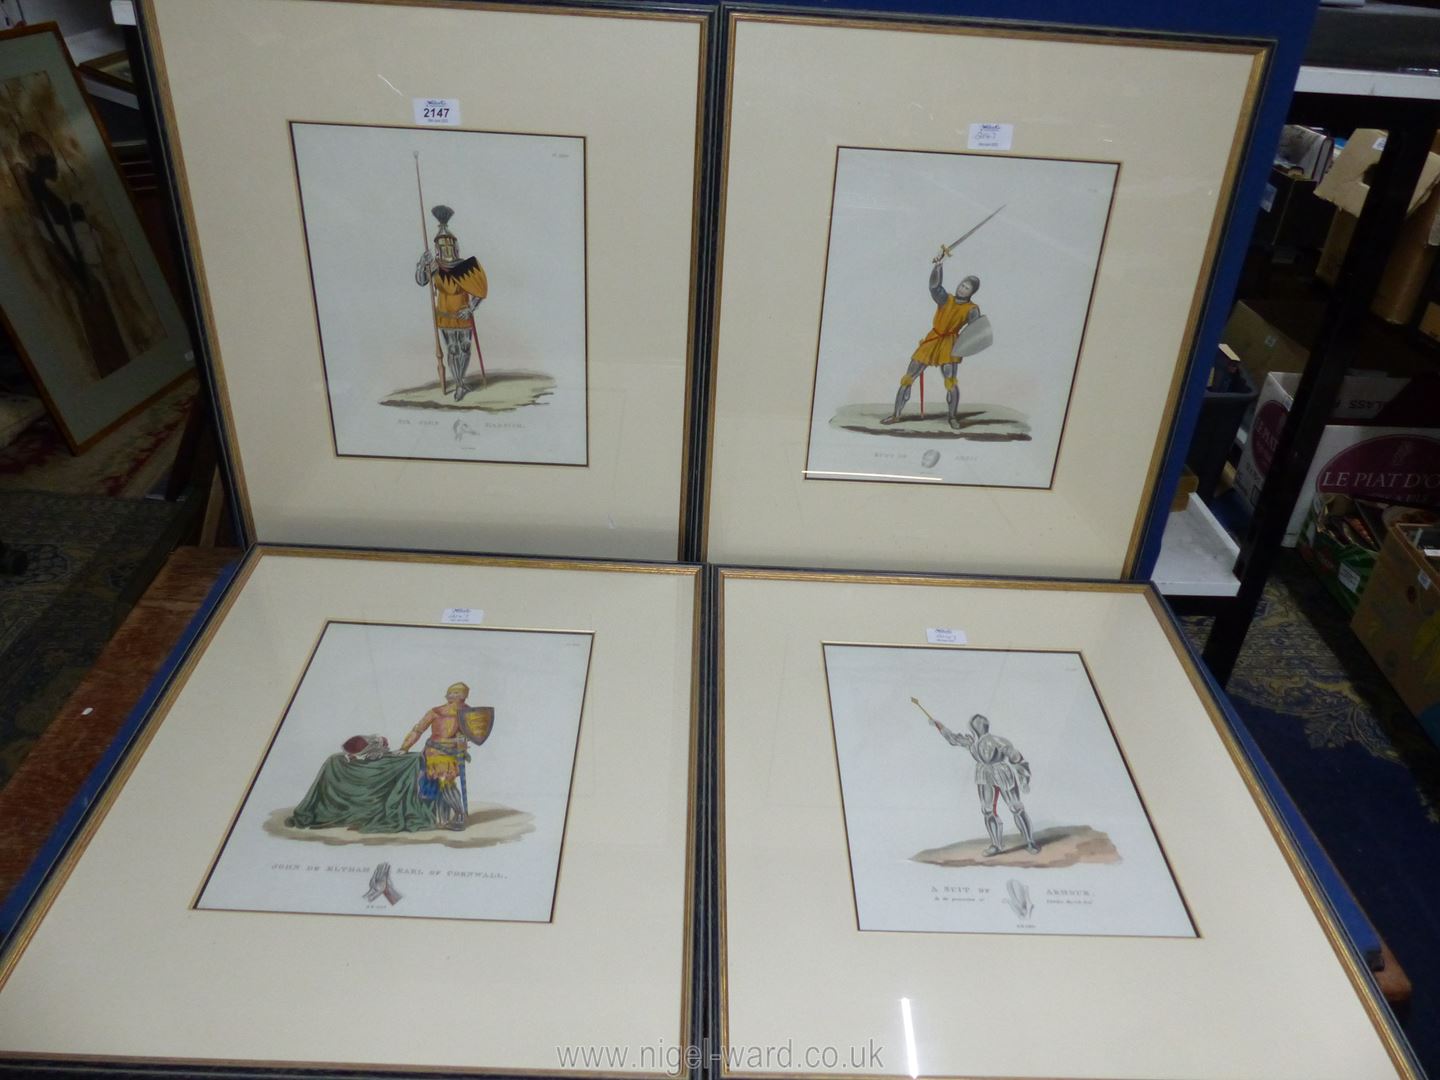 Four framed and mounted Plates depicting Men in Armour titled 'A Suit of Armour in the possession